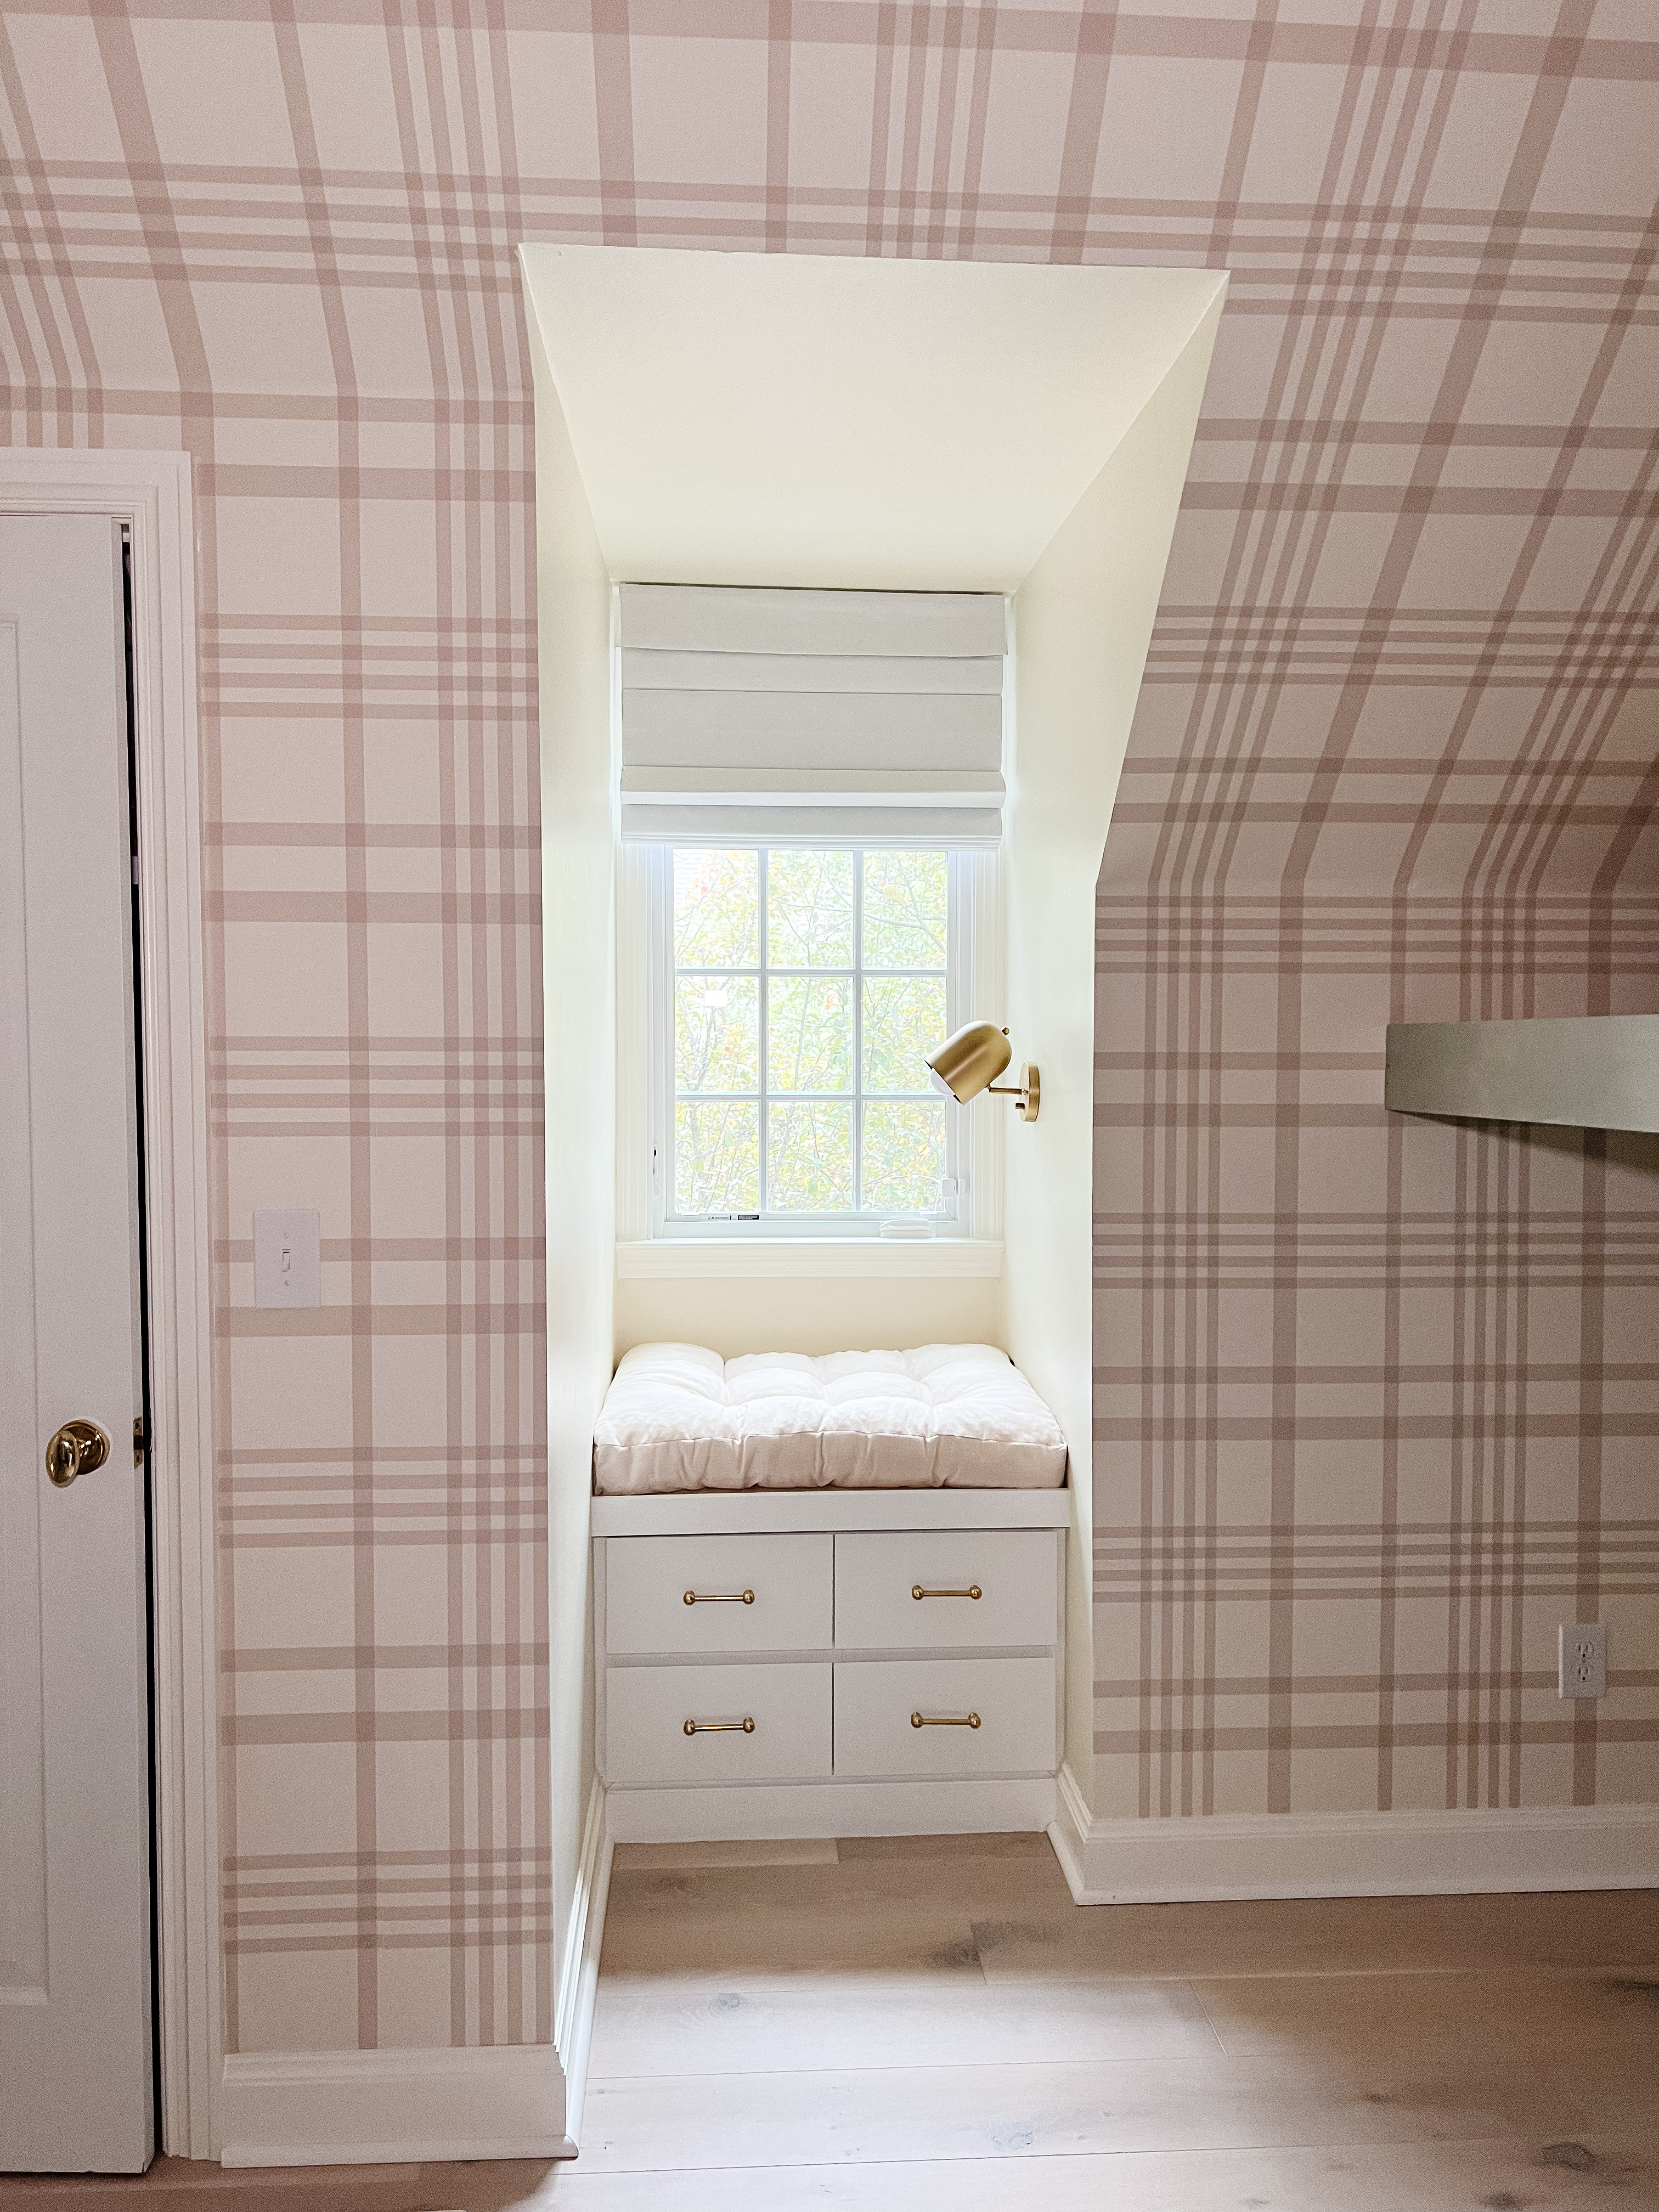 Window seat with four drawers in a dormer window of a room with plaid wallpaper.